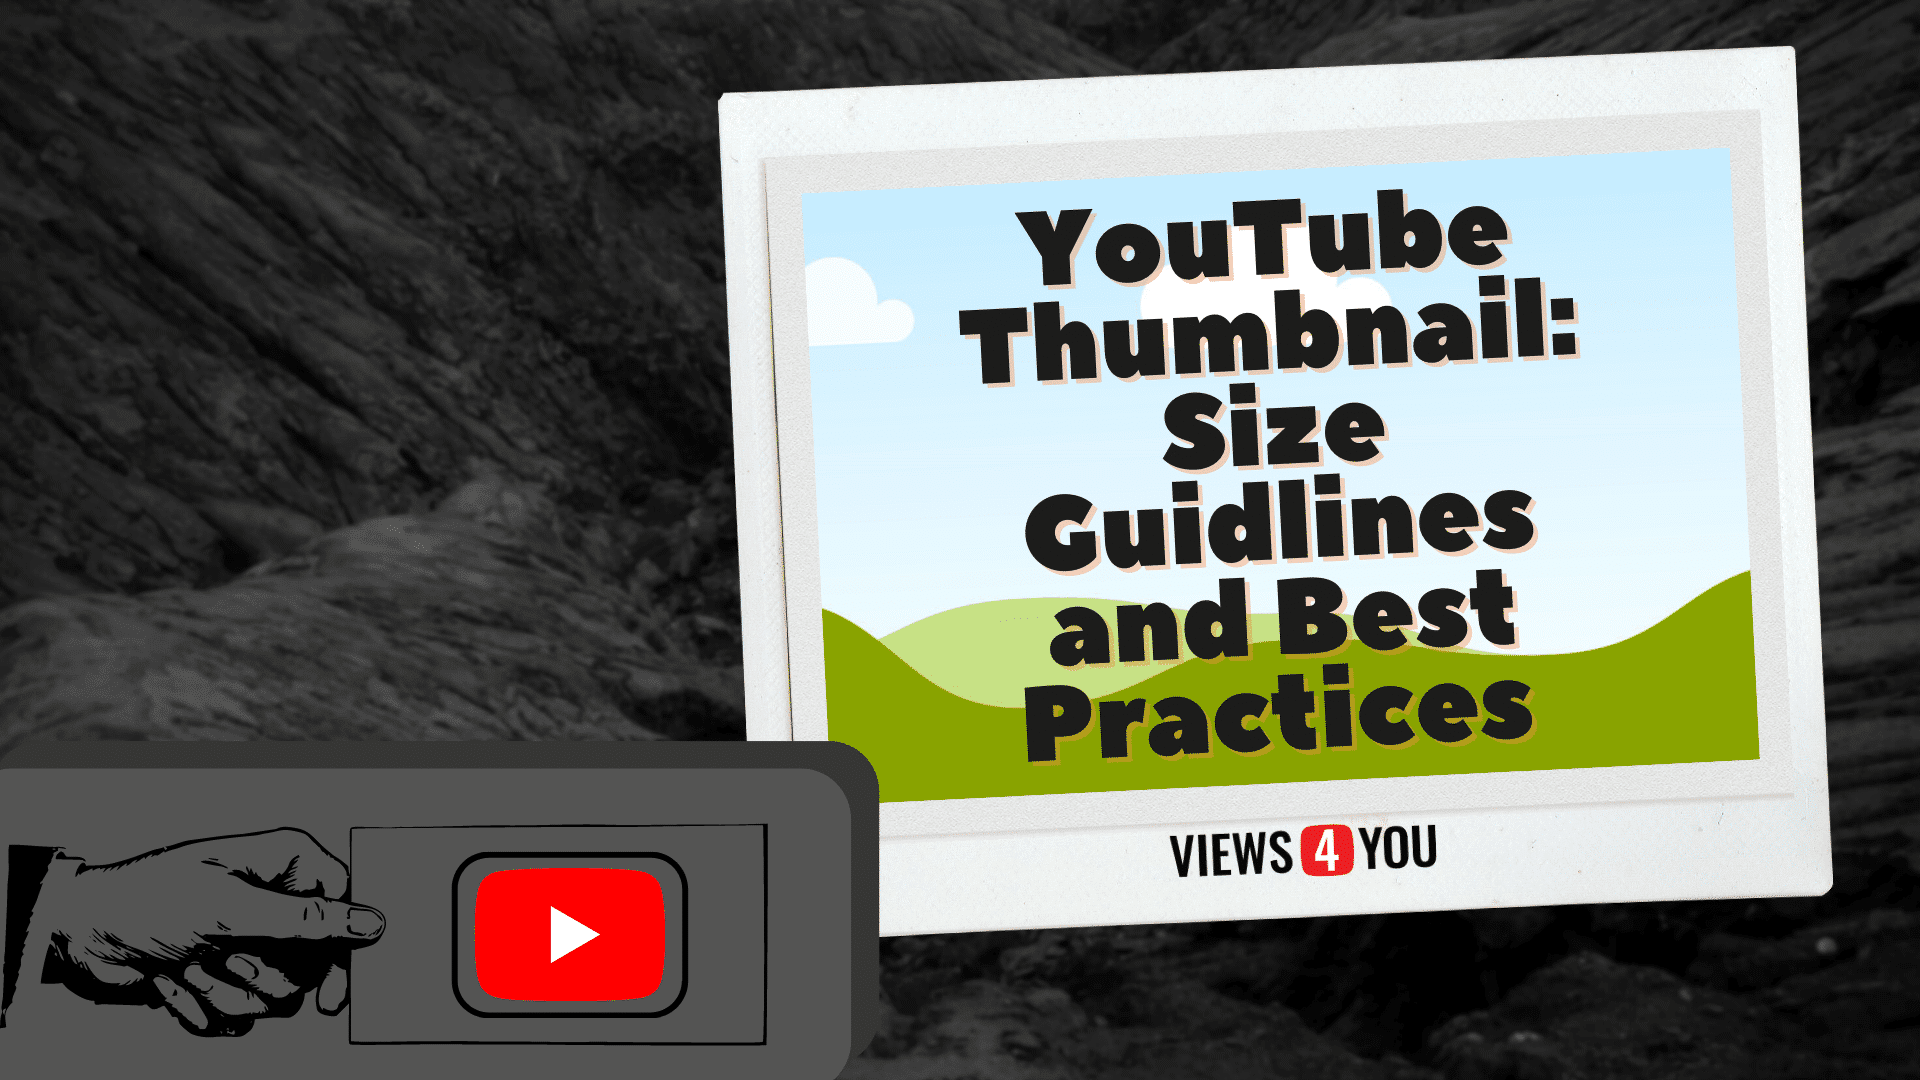 YouTube Thumbnail: Size Guidlines and Best Practices